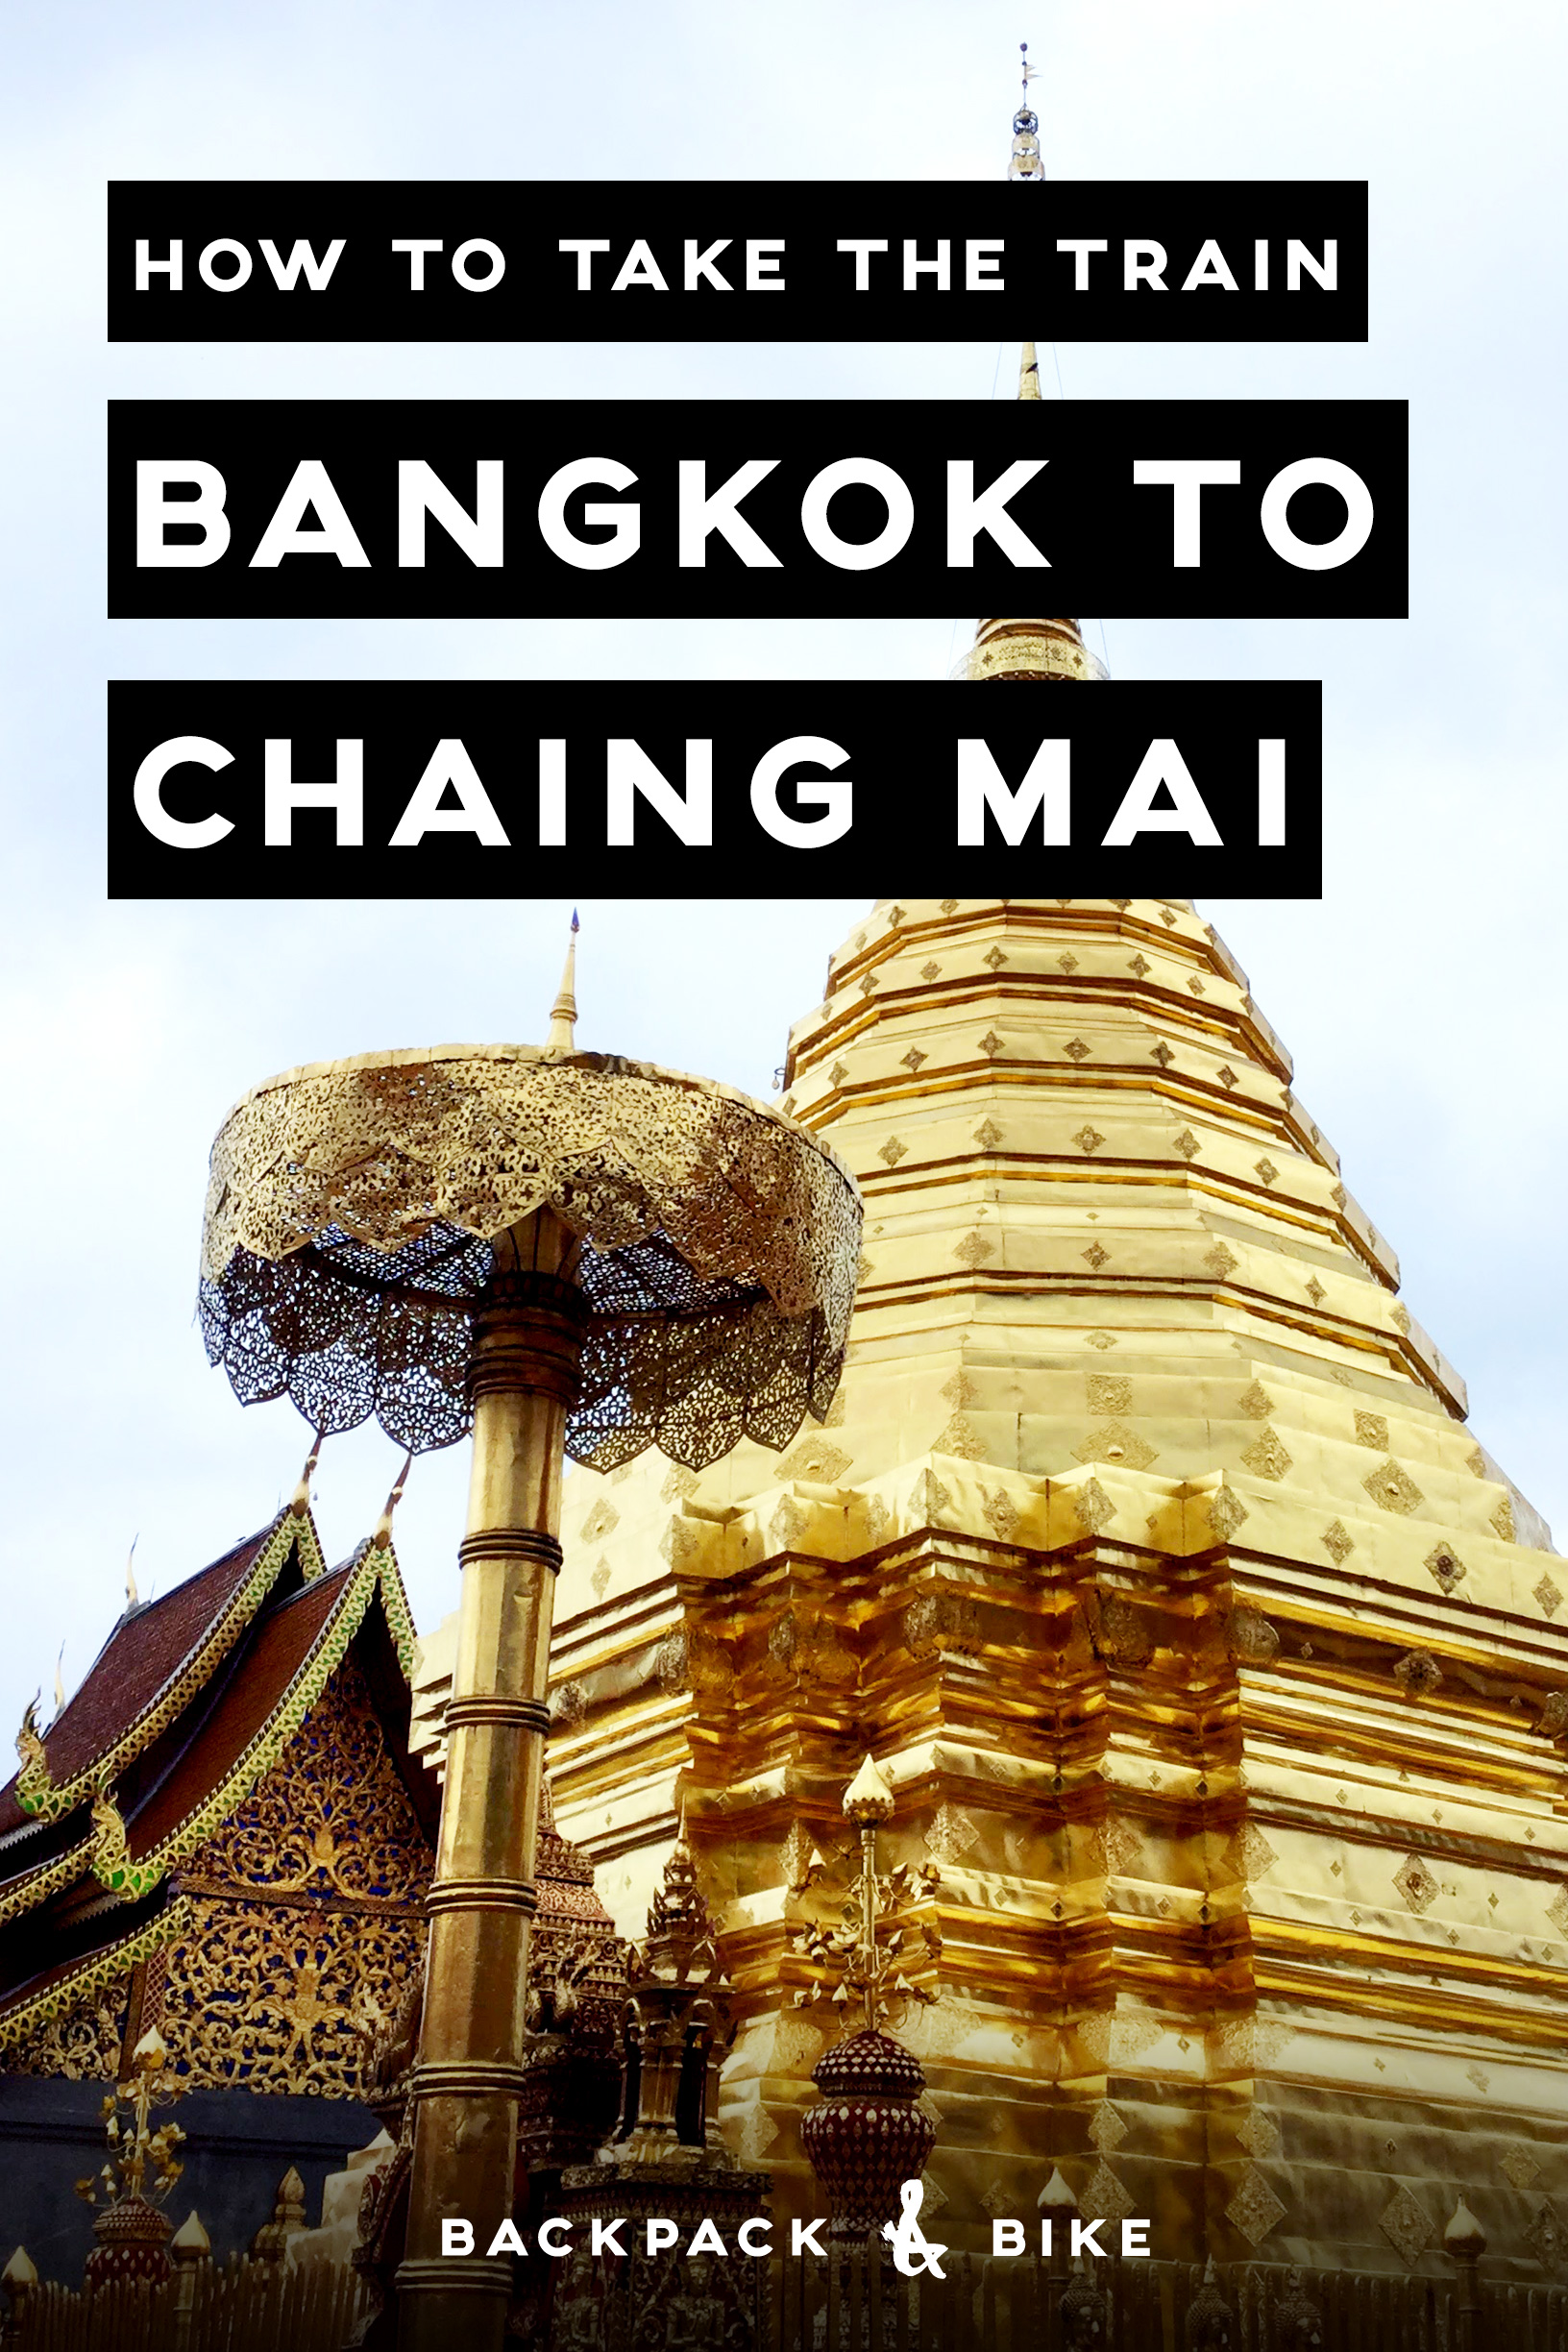 How to take the train Bangkok to Chiang Mai | If you're visiting Thailand, chances are you'll arrive in Bangkok. But you want to get to Chiang Mai? No worries, it's easy. Pin for reference!